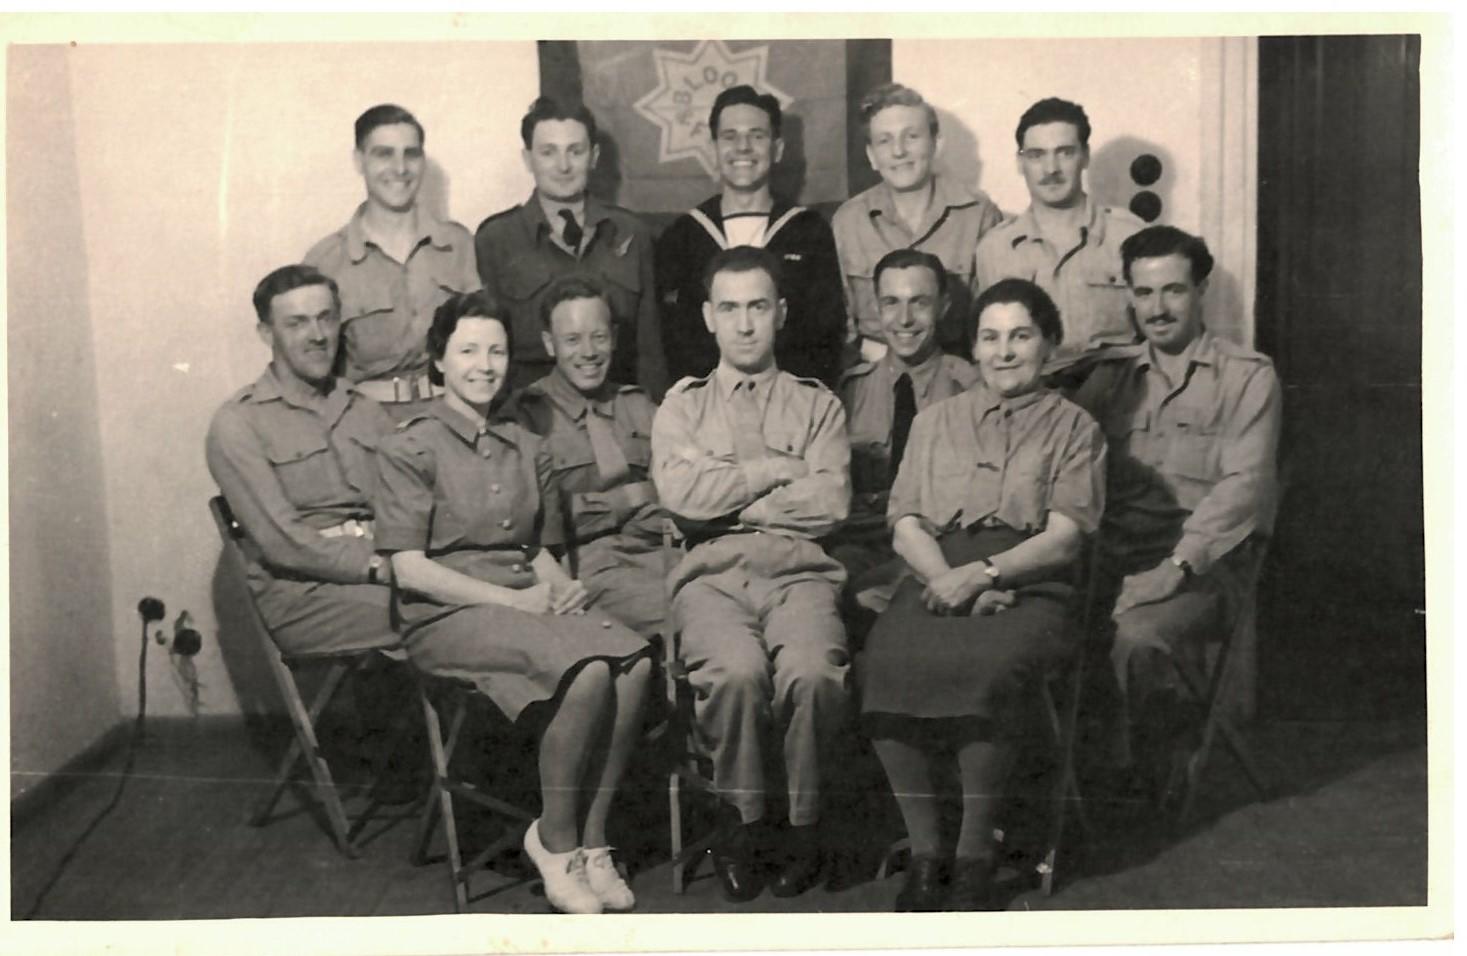 Middle East Red Shield Staff and Helpers featuring Olive Cooksley (far right).